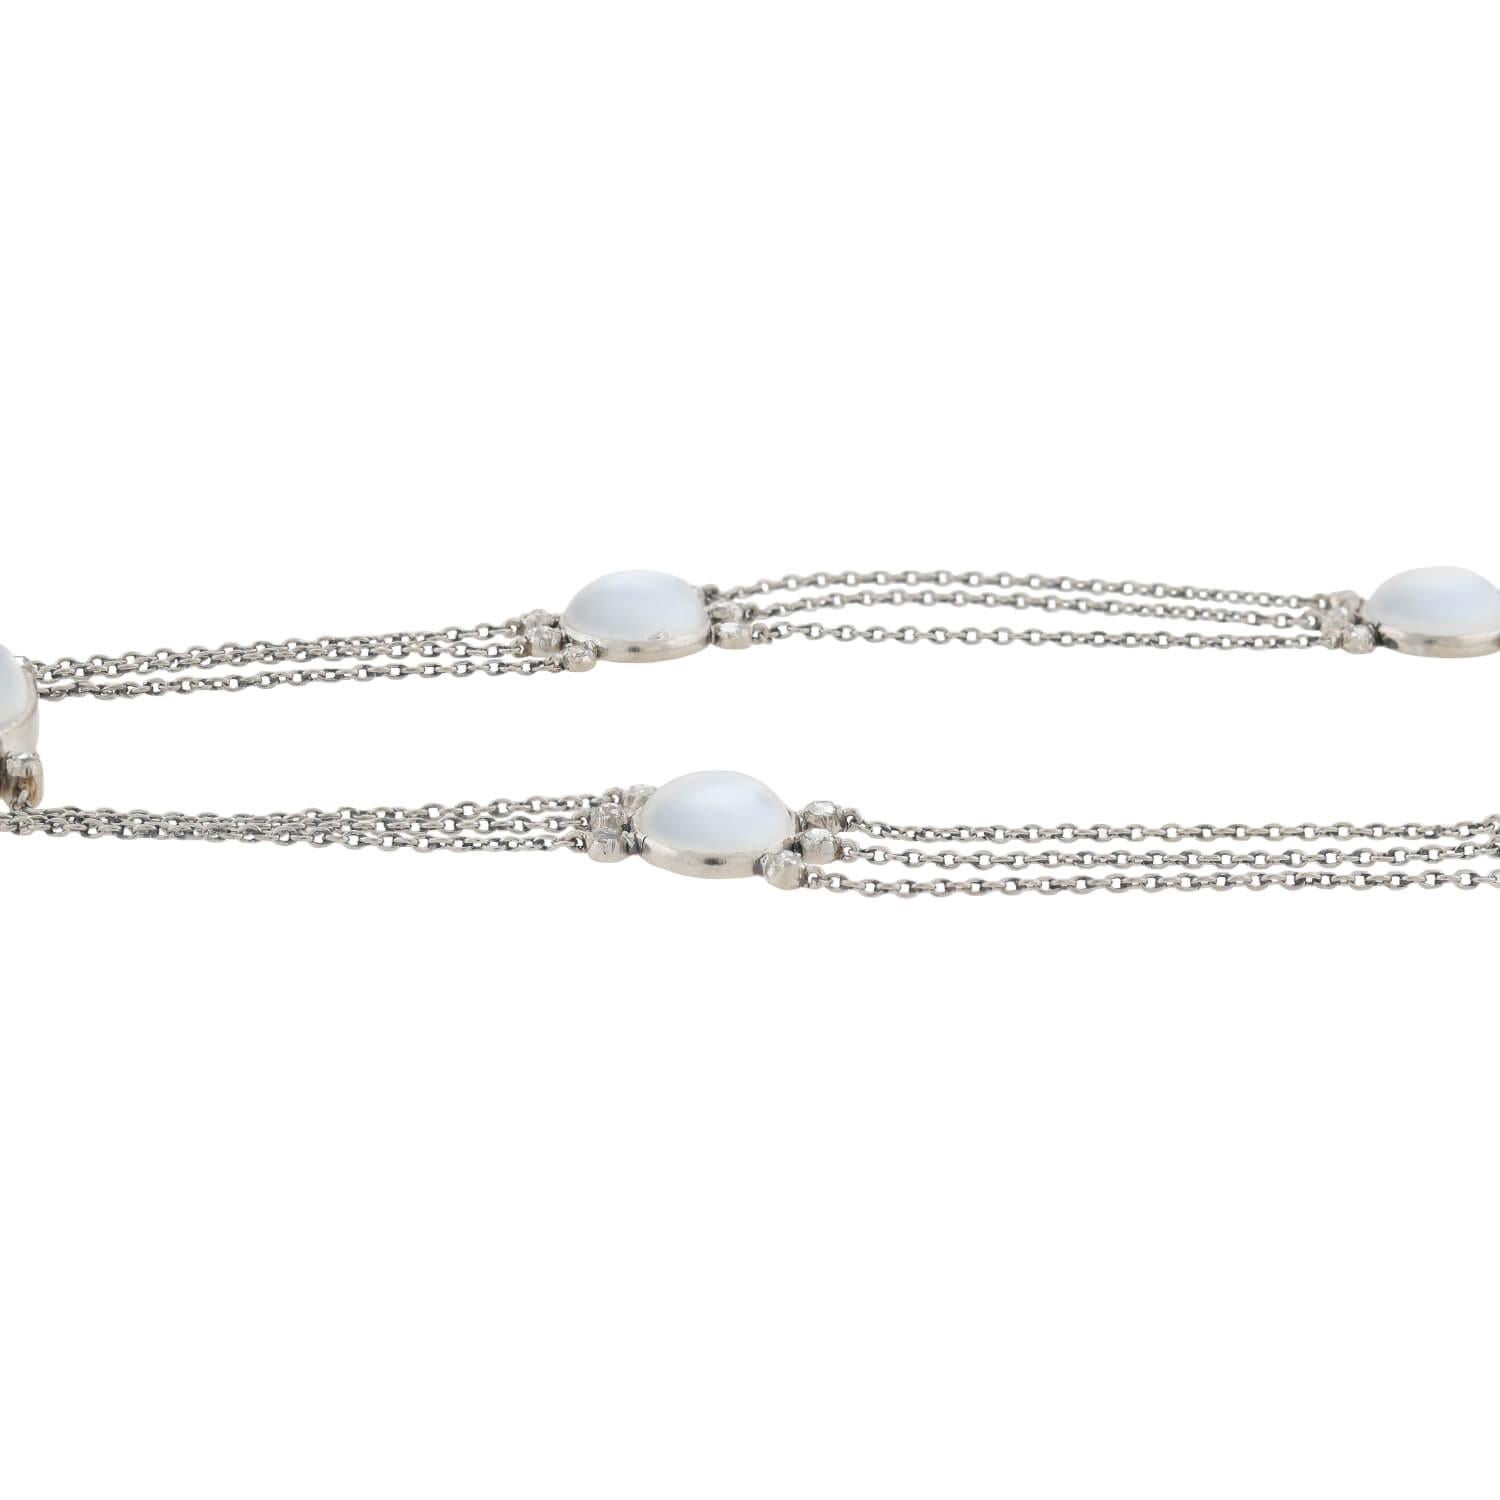 An absolutely stunning diamond and moonstone necklace from the Edwardian (ca1910s) era! Crafted in platinum, this unusual piece features eight luminescent blue moonstones of varying shape, each resting in a platinum bezel setting. Apart from the